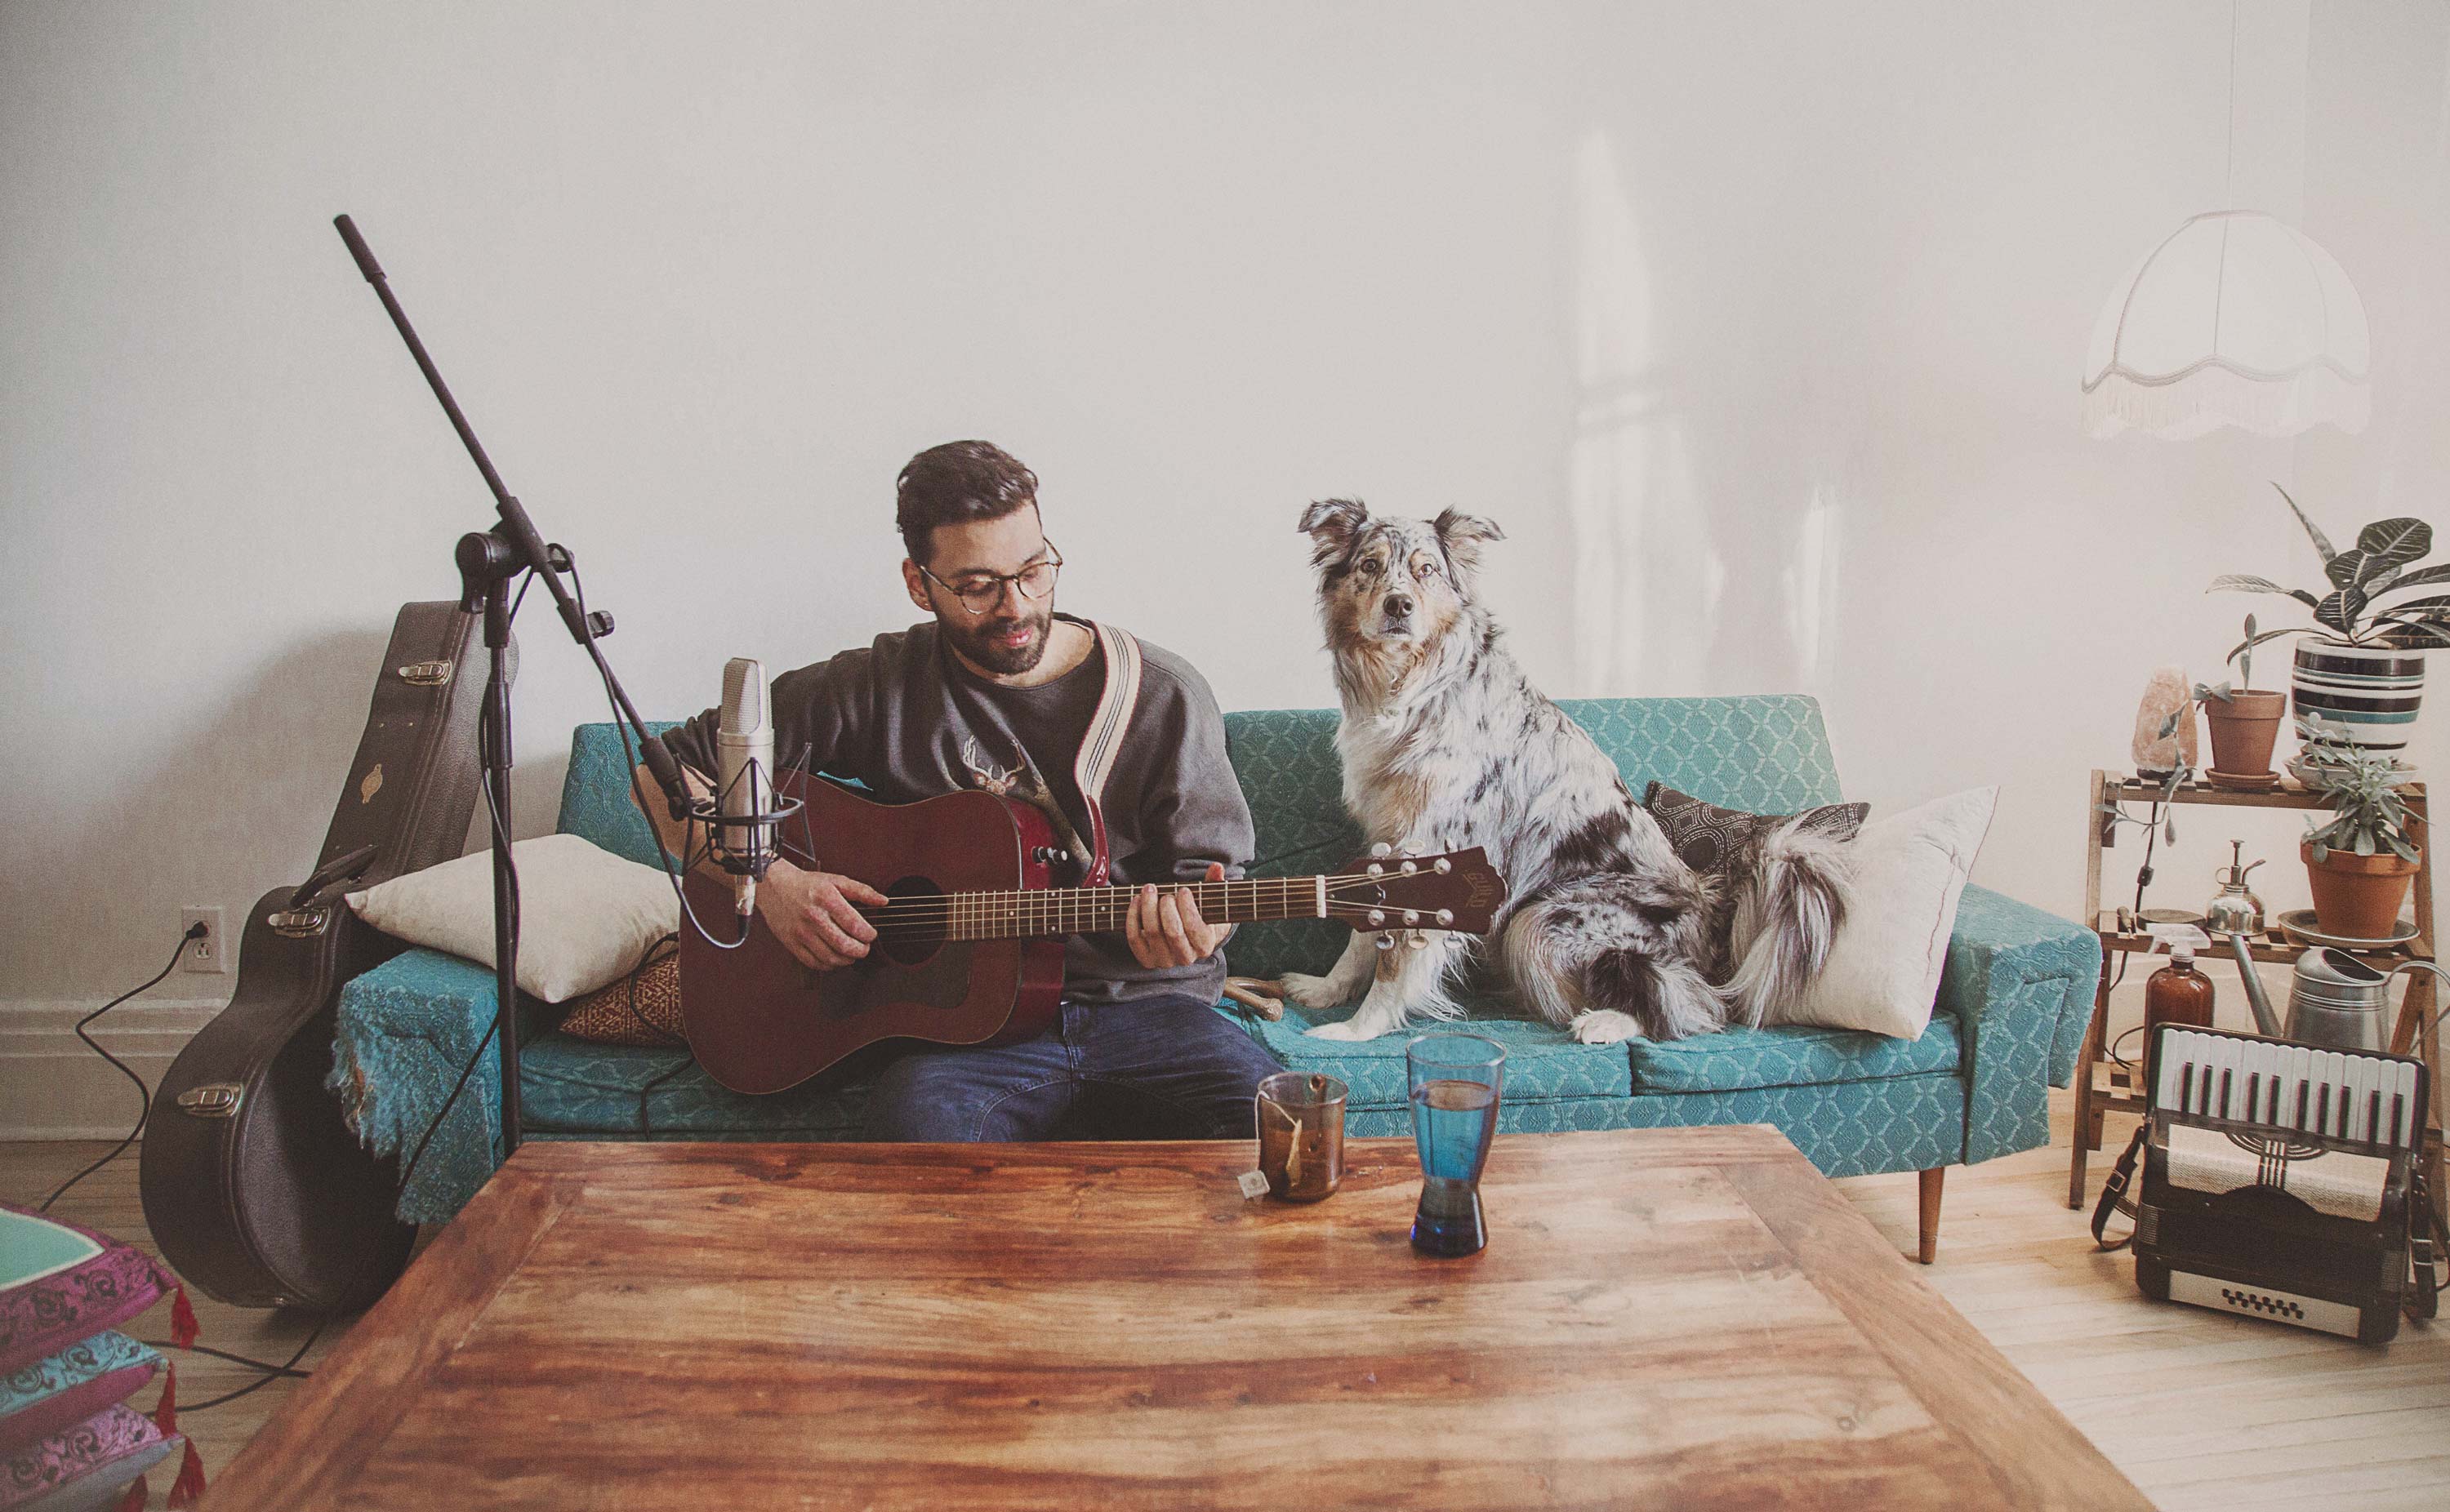 Man playing guitar on the couch with his dog